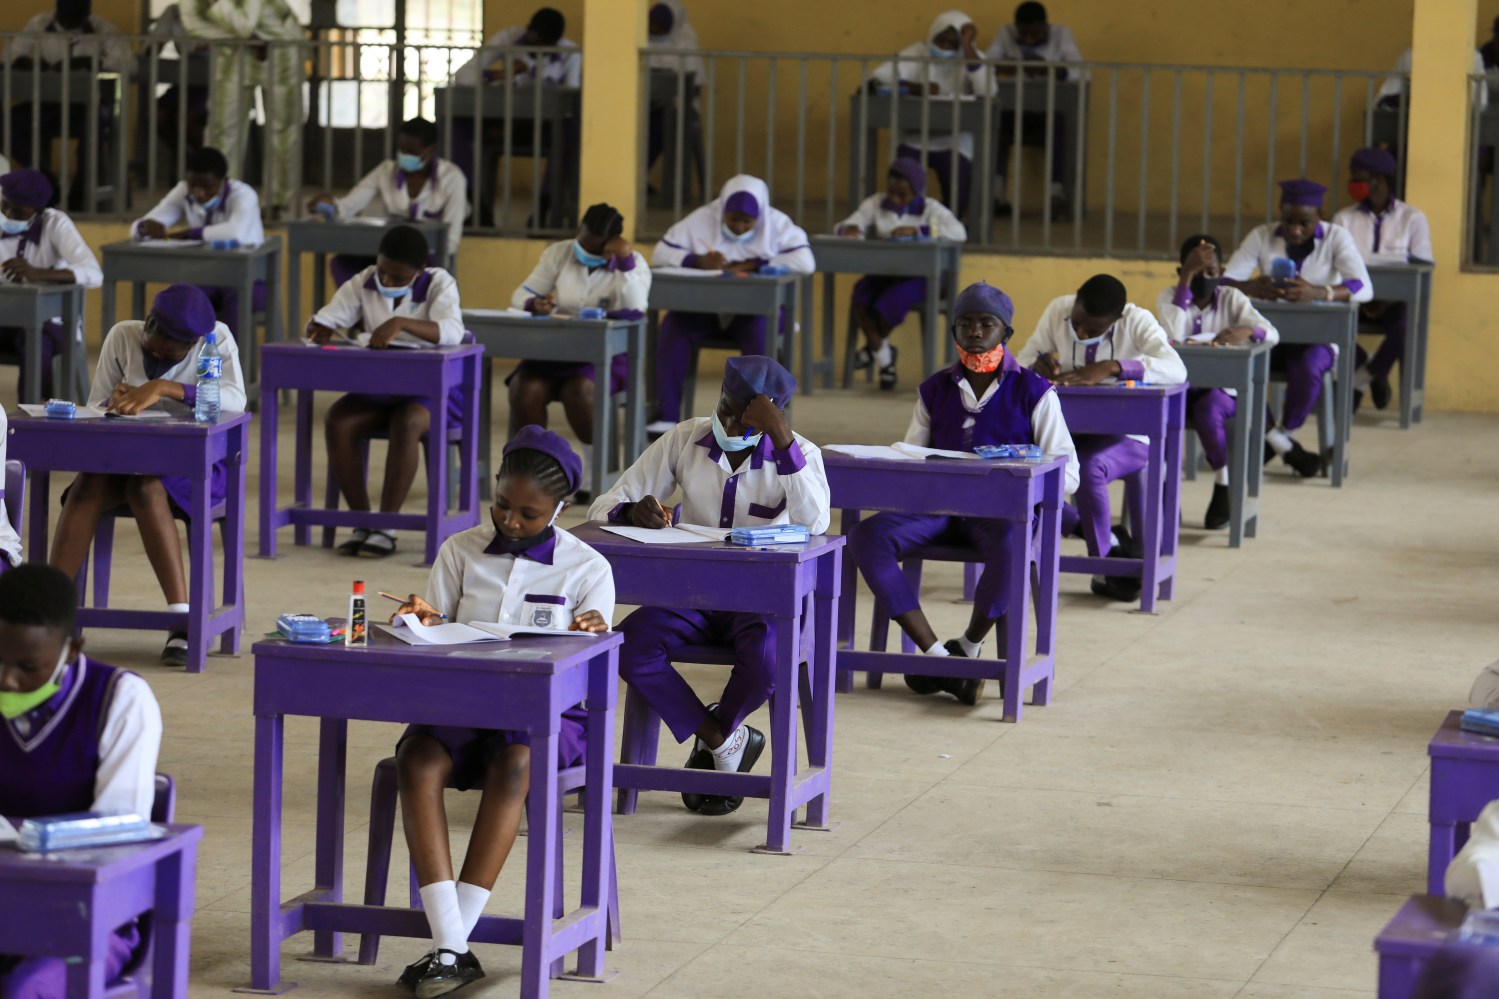 Students of Government Secondary School Wuse, are seen taking the West African Examination Council (WAEC) 2020 exam, after coronavirus disease (COVID-19) lockdown in Abuja, Nigeria  August 17, 2020. REUTERS/Afolabi Sotunde